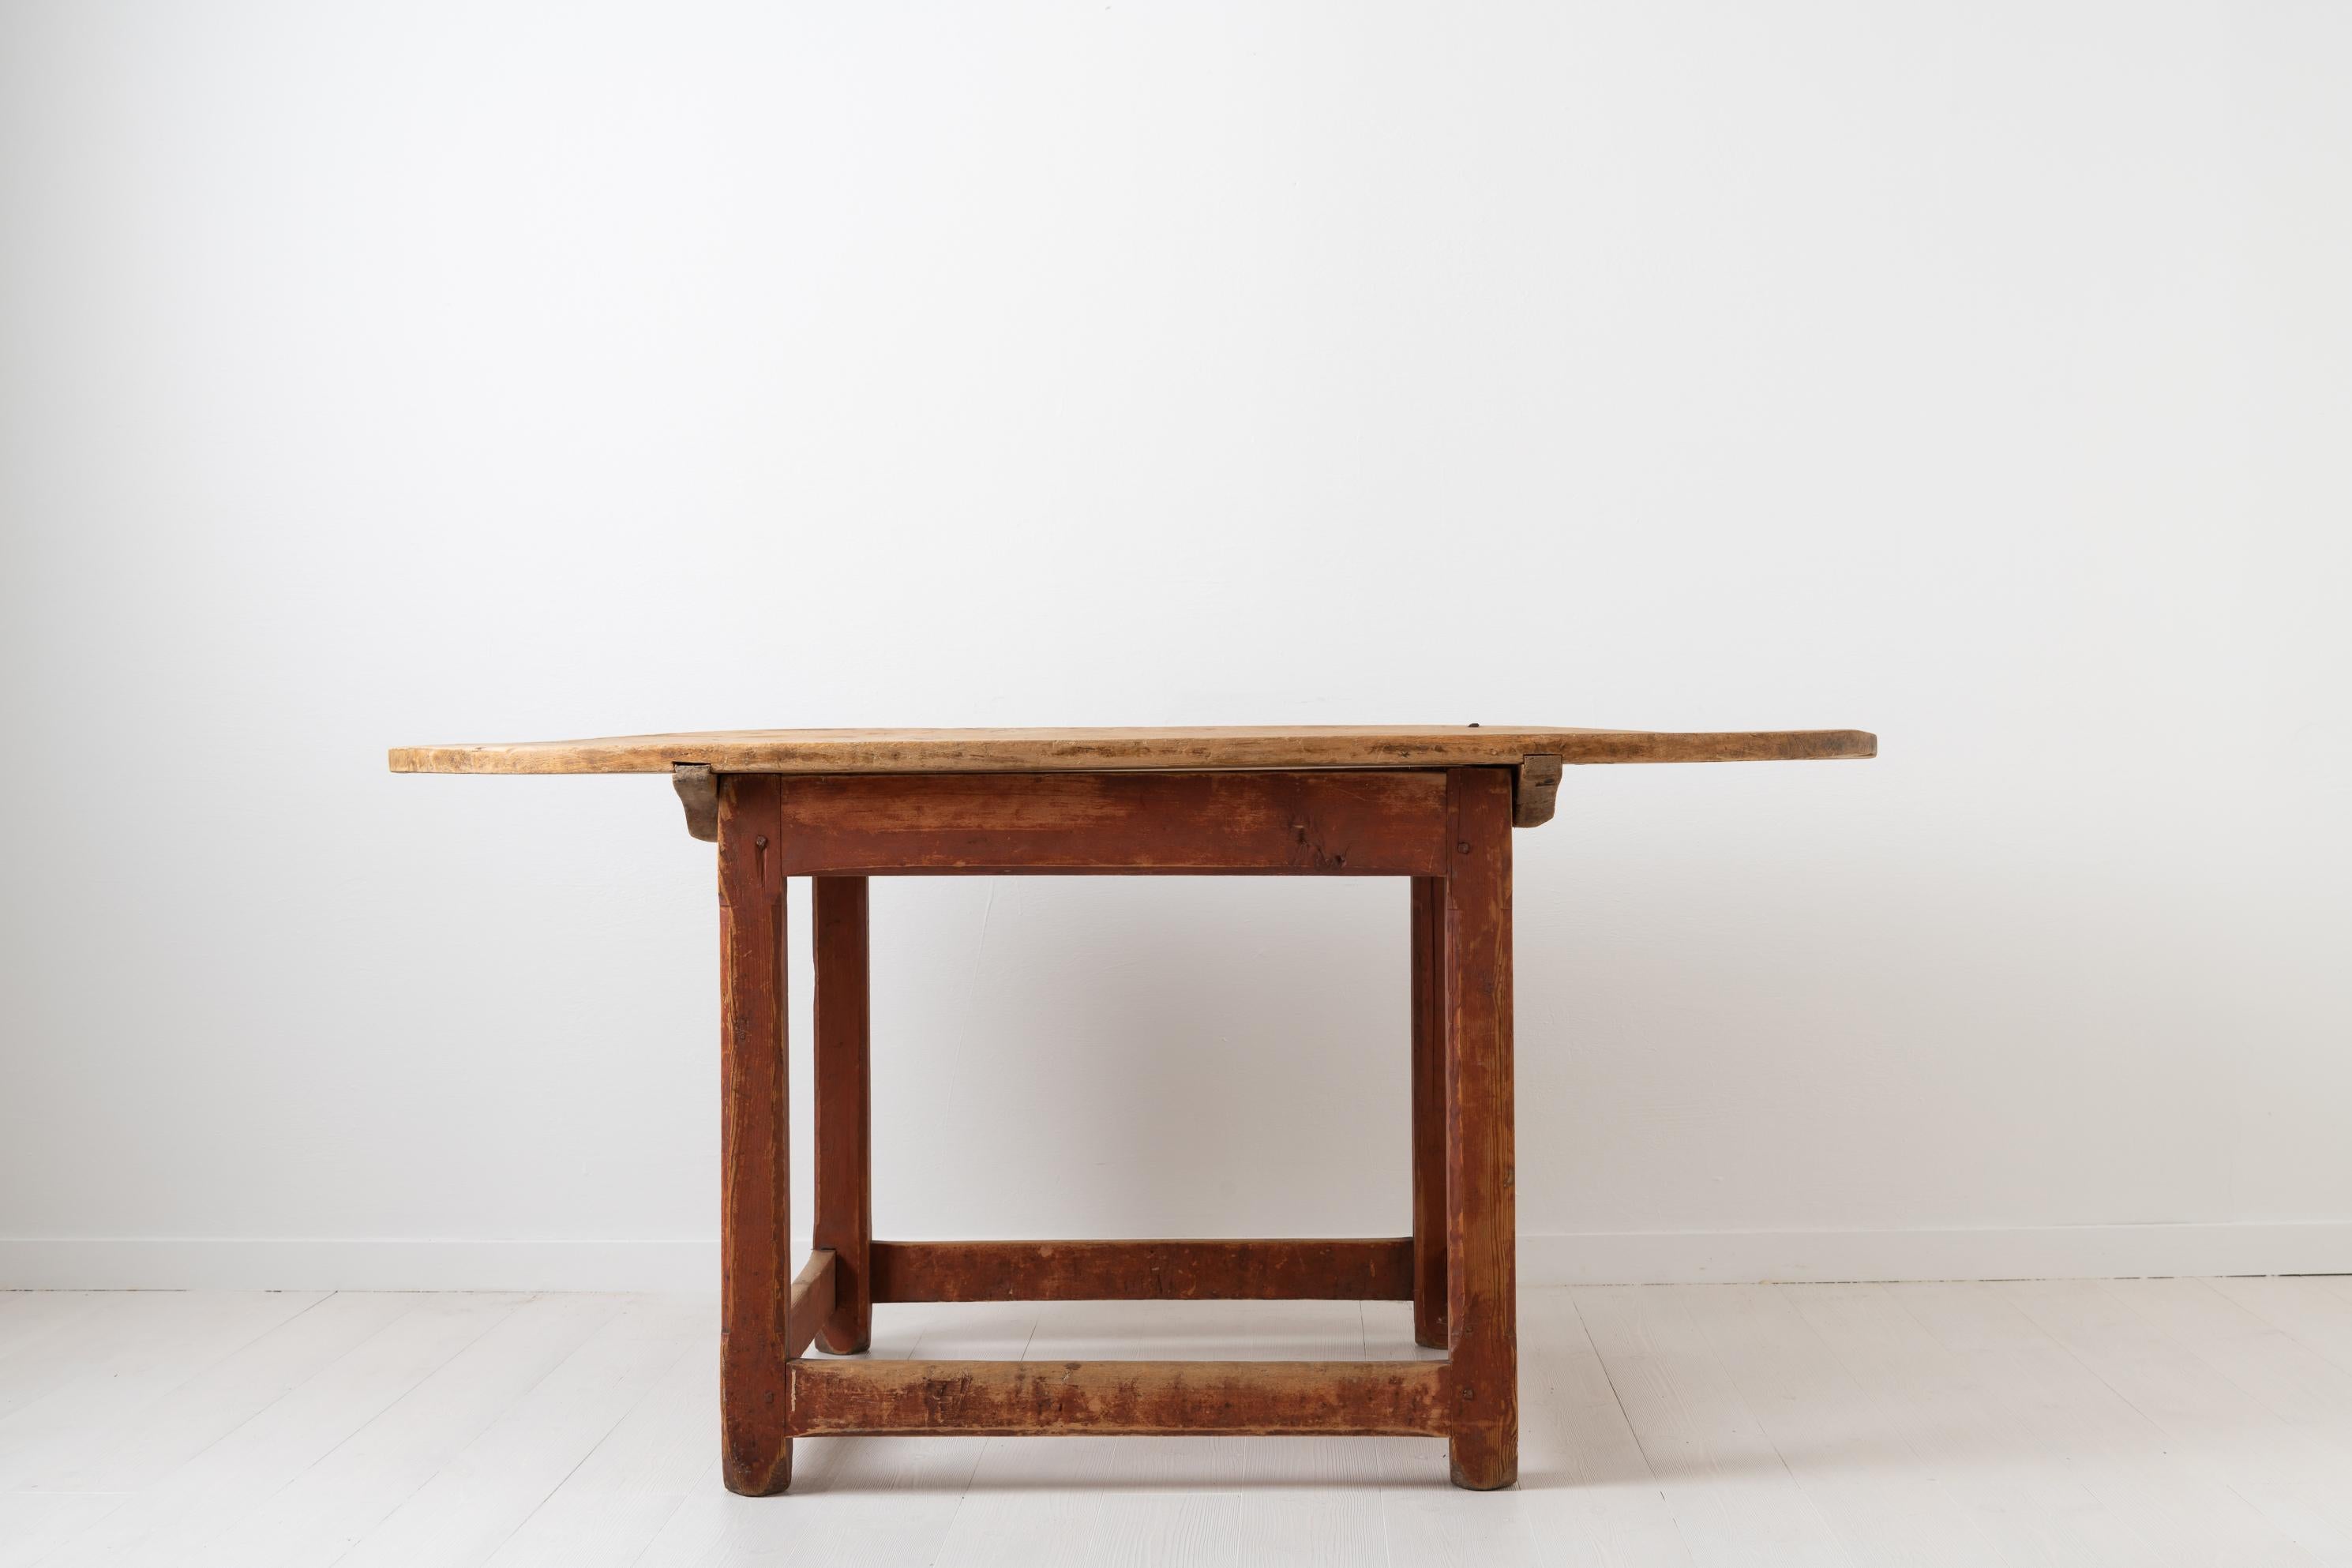 Hand-Crafted Late 1700s Swedish Rustic Baroque Centre Table For Sale